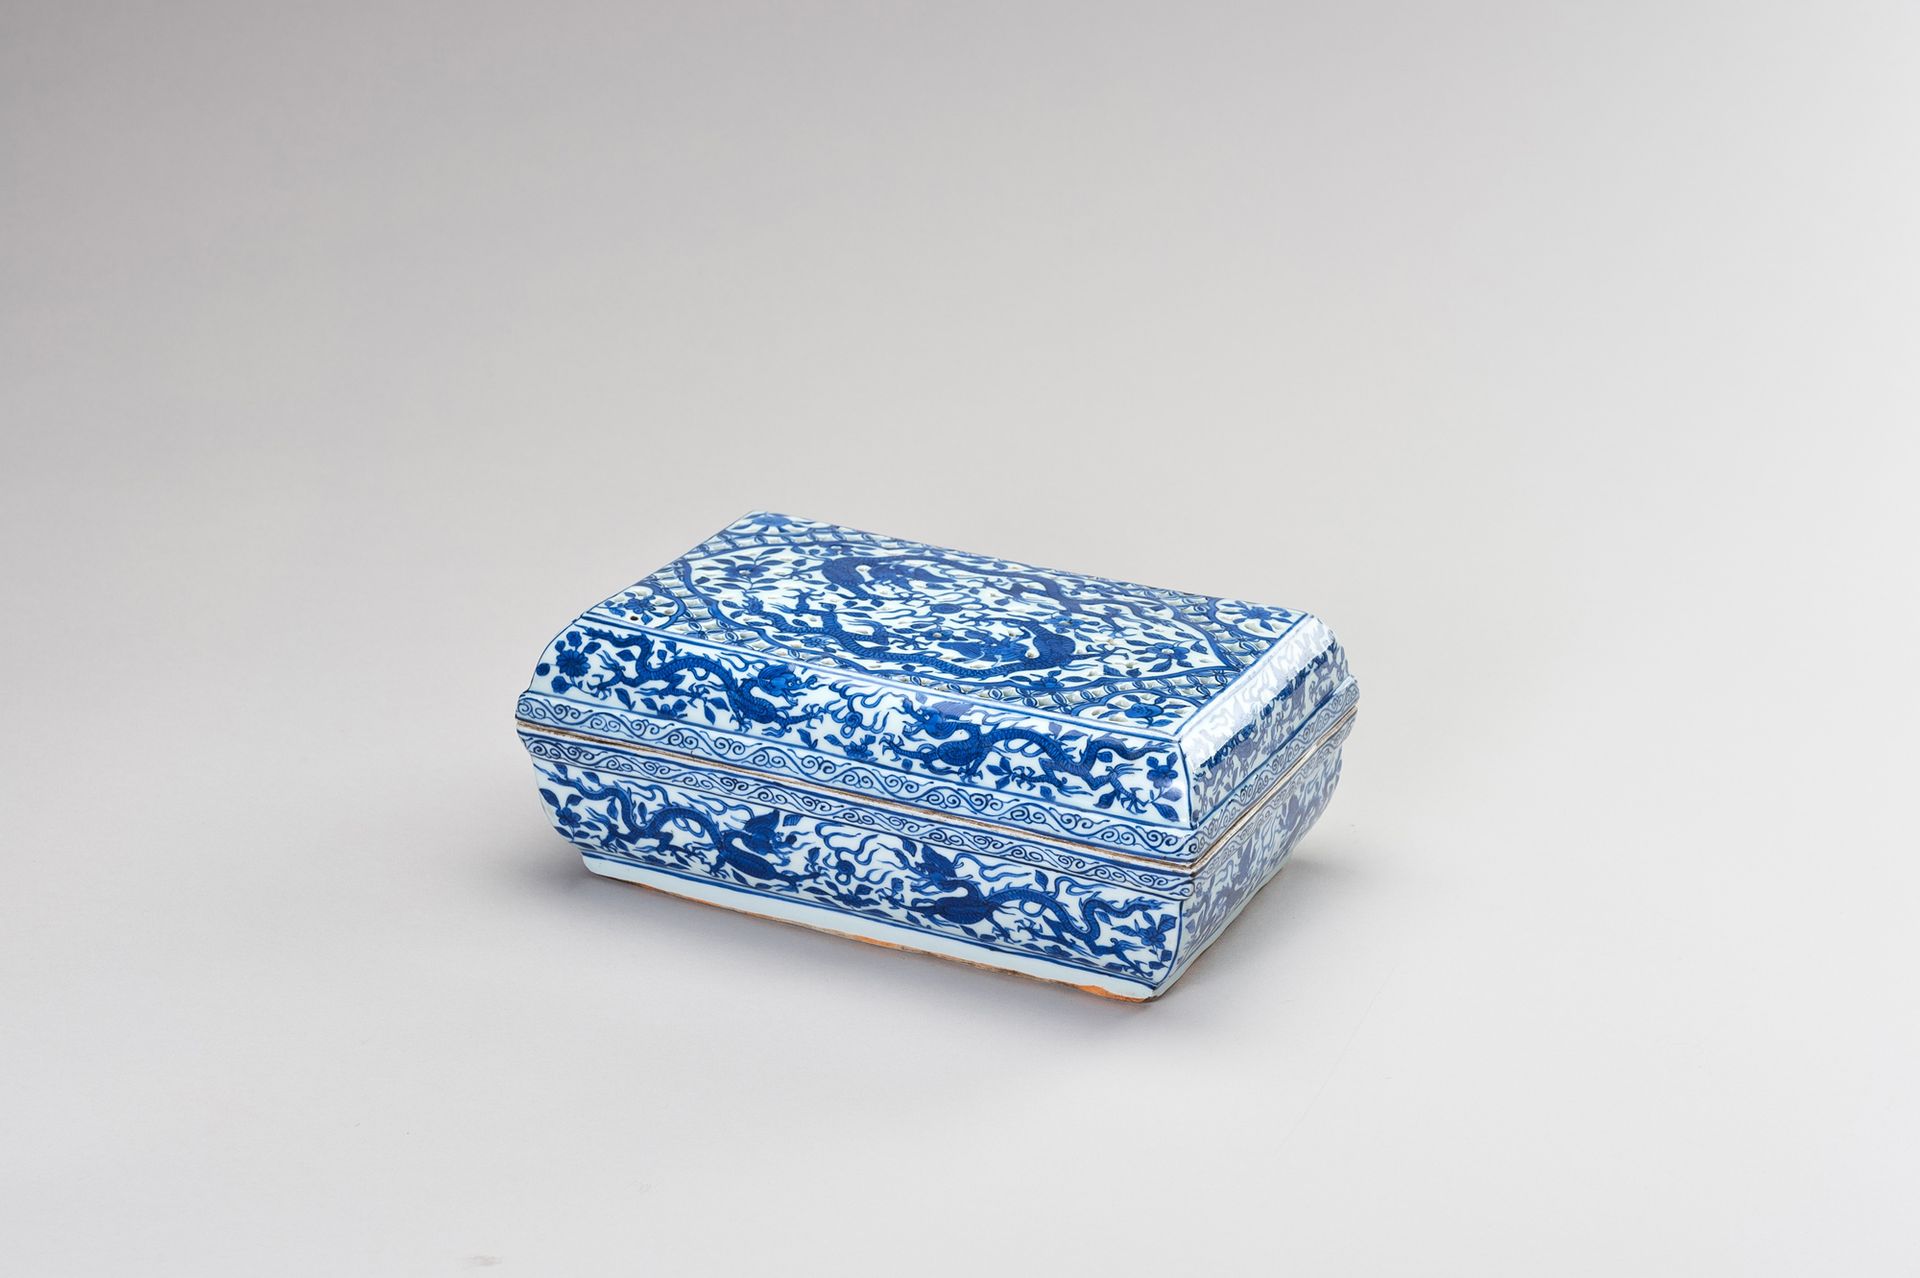 A BLUE AND WHITE ‘DRAGON’ SCENT BOX AND COVER 一个蓝白相间的 "龙 "香盒和盖子
中国，清朝（1644-1912）&hellip;